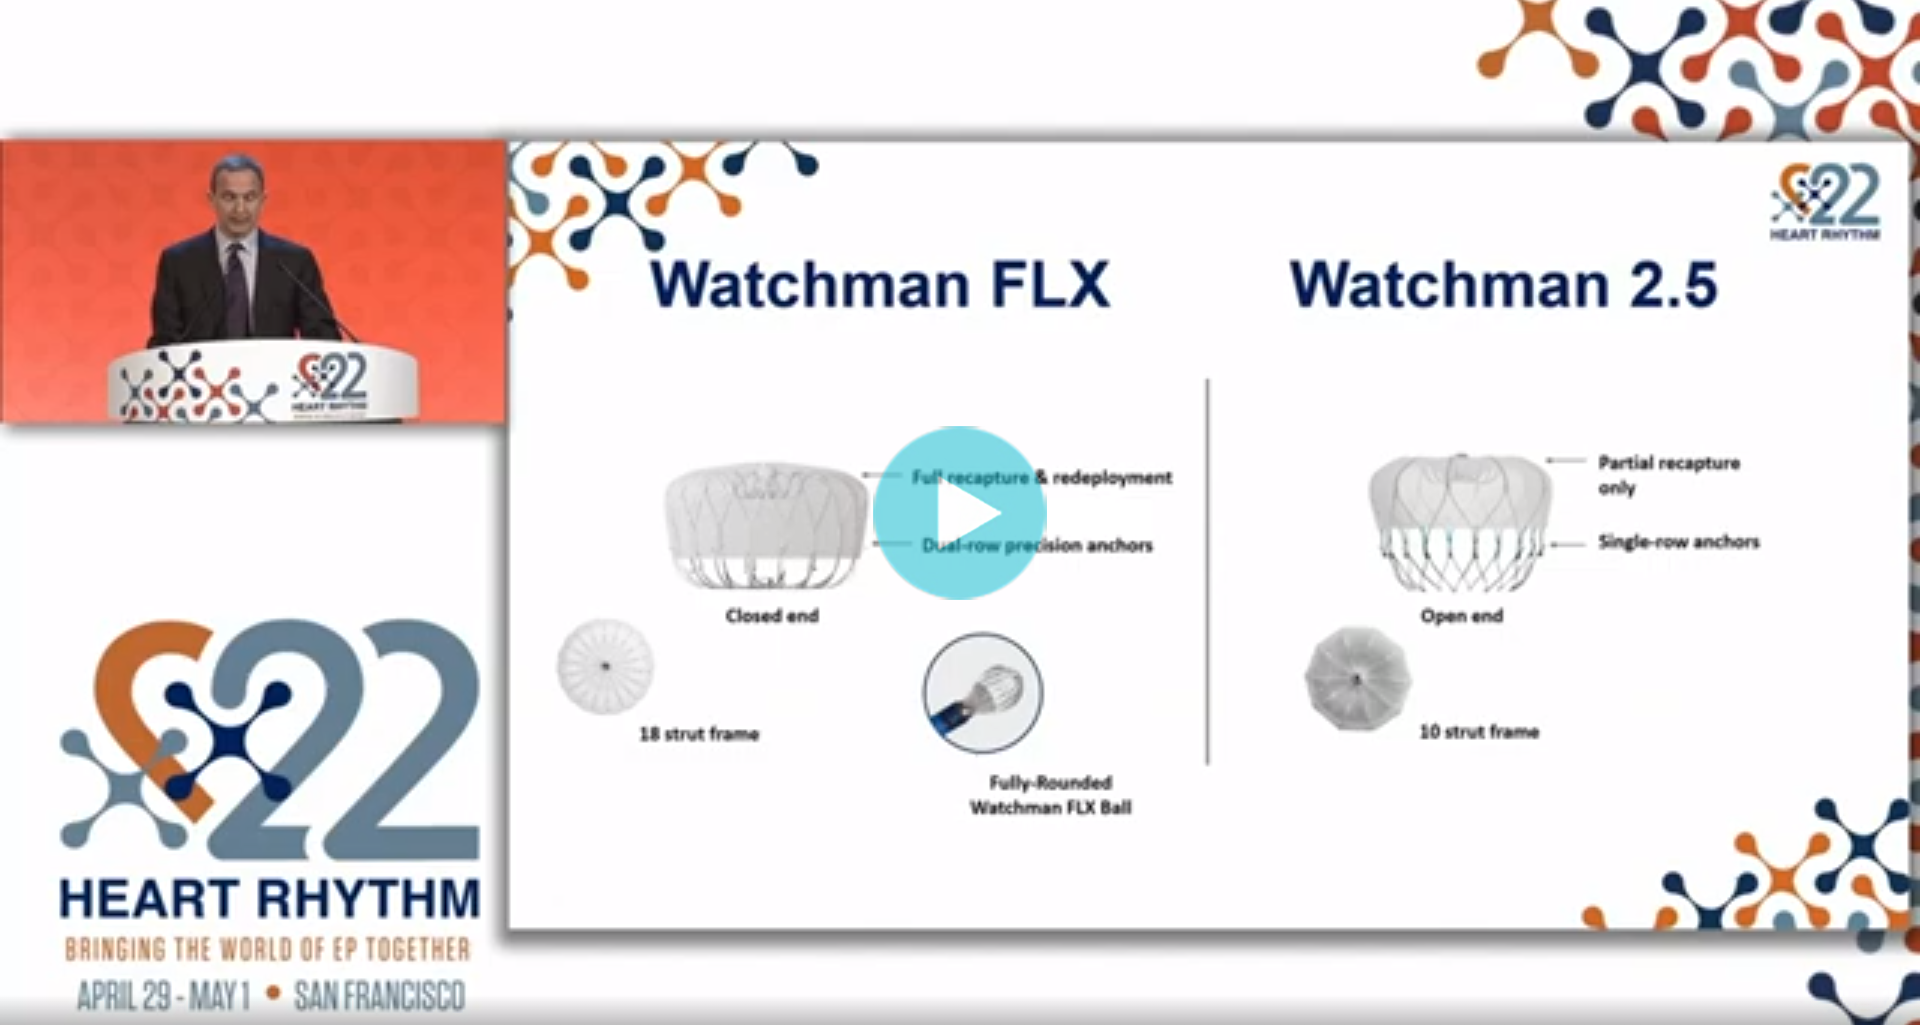 Watchman FLX compared with Watchman Generation 2.5